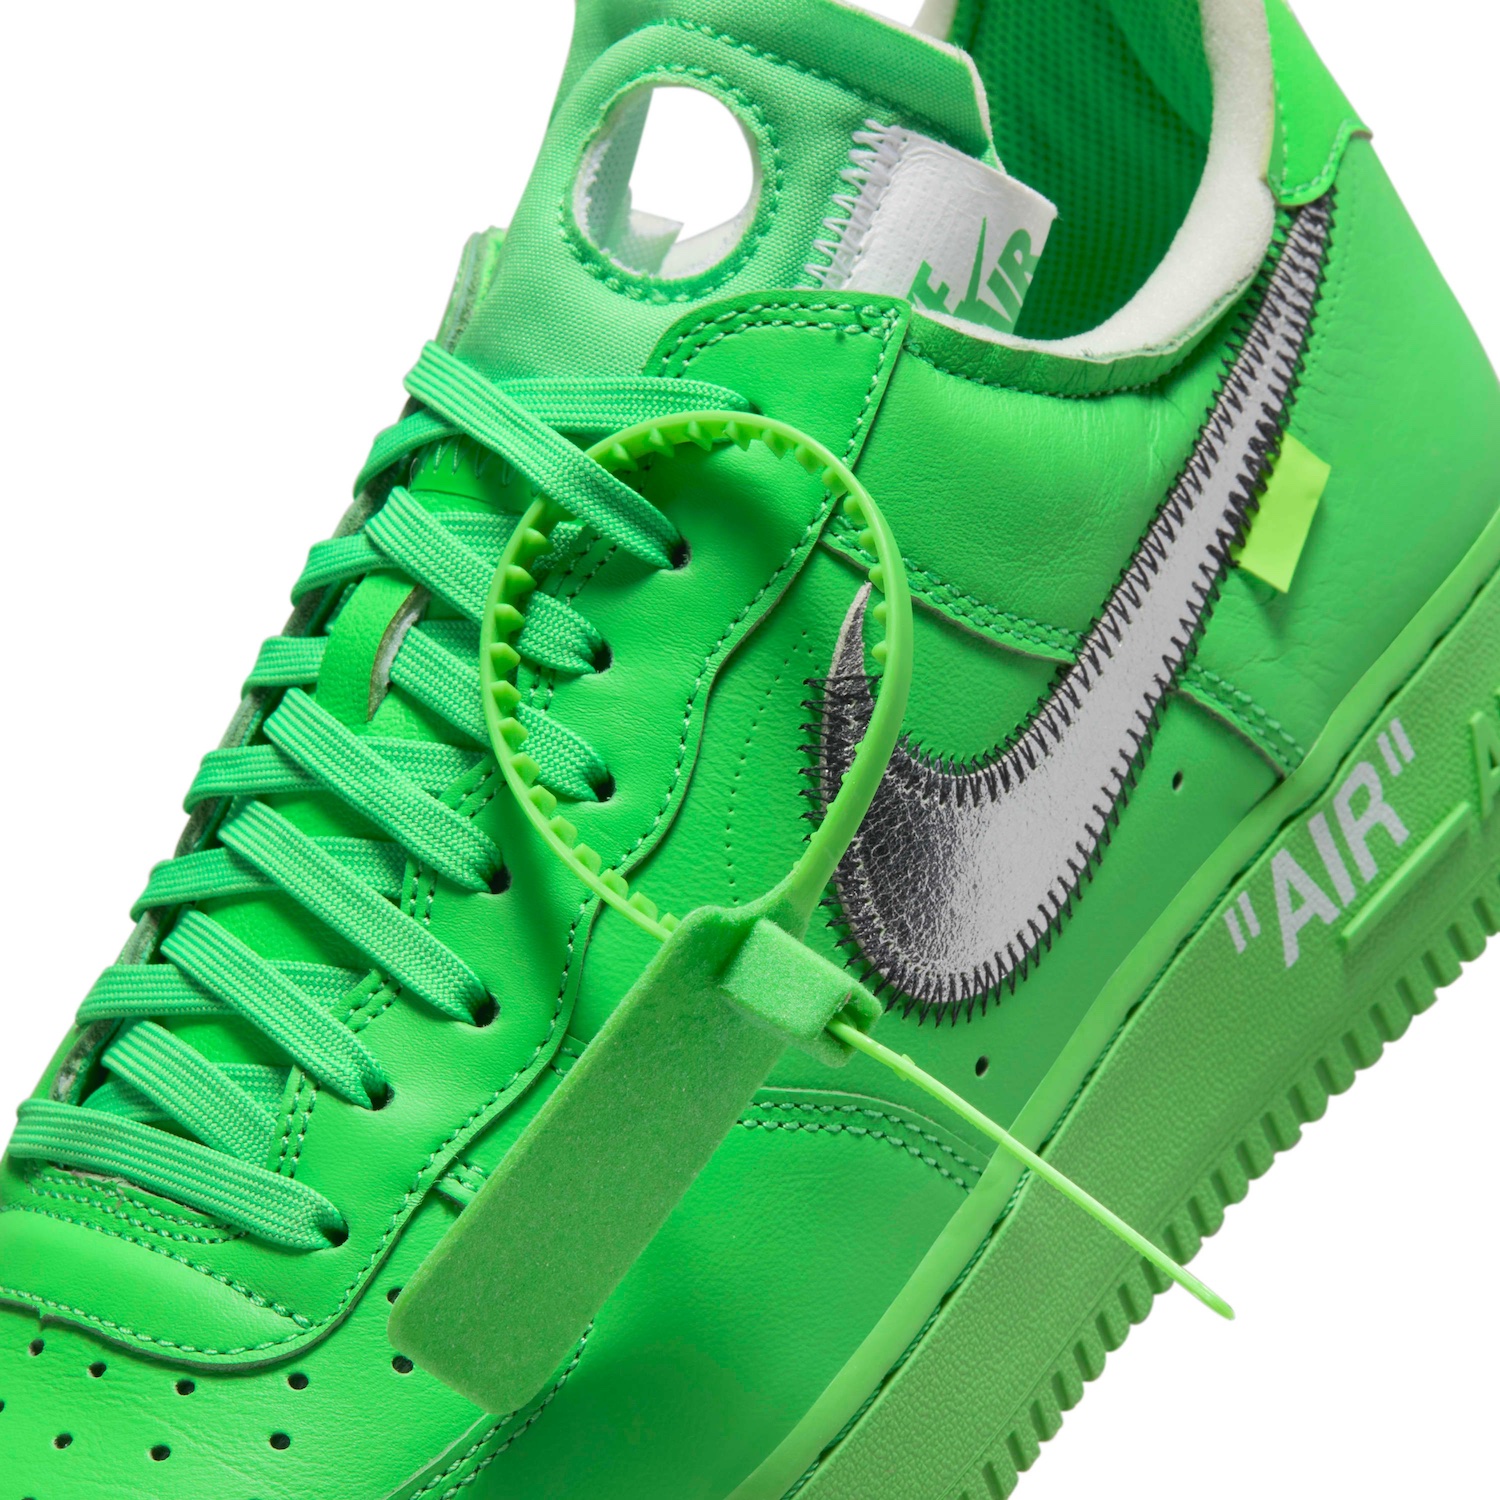 off-white-nike-air-force-1-sp-light-green-spark-brooklyn-museum-2.jpeg